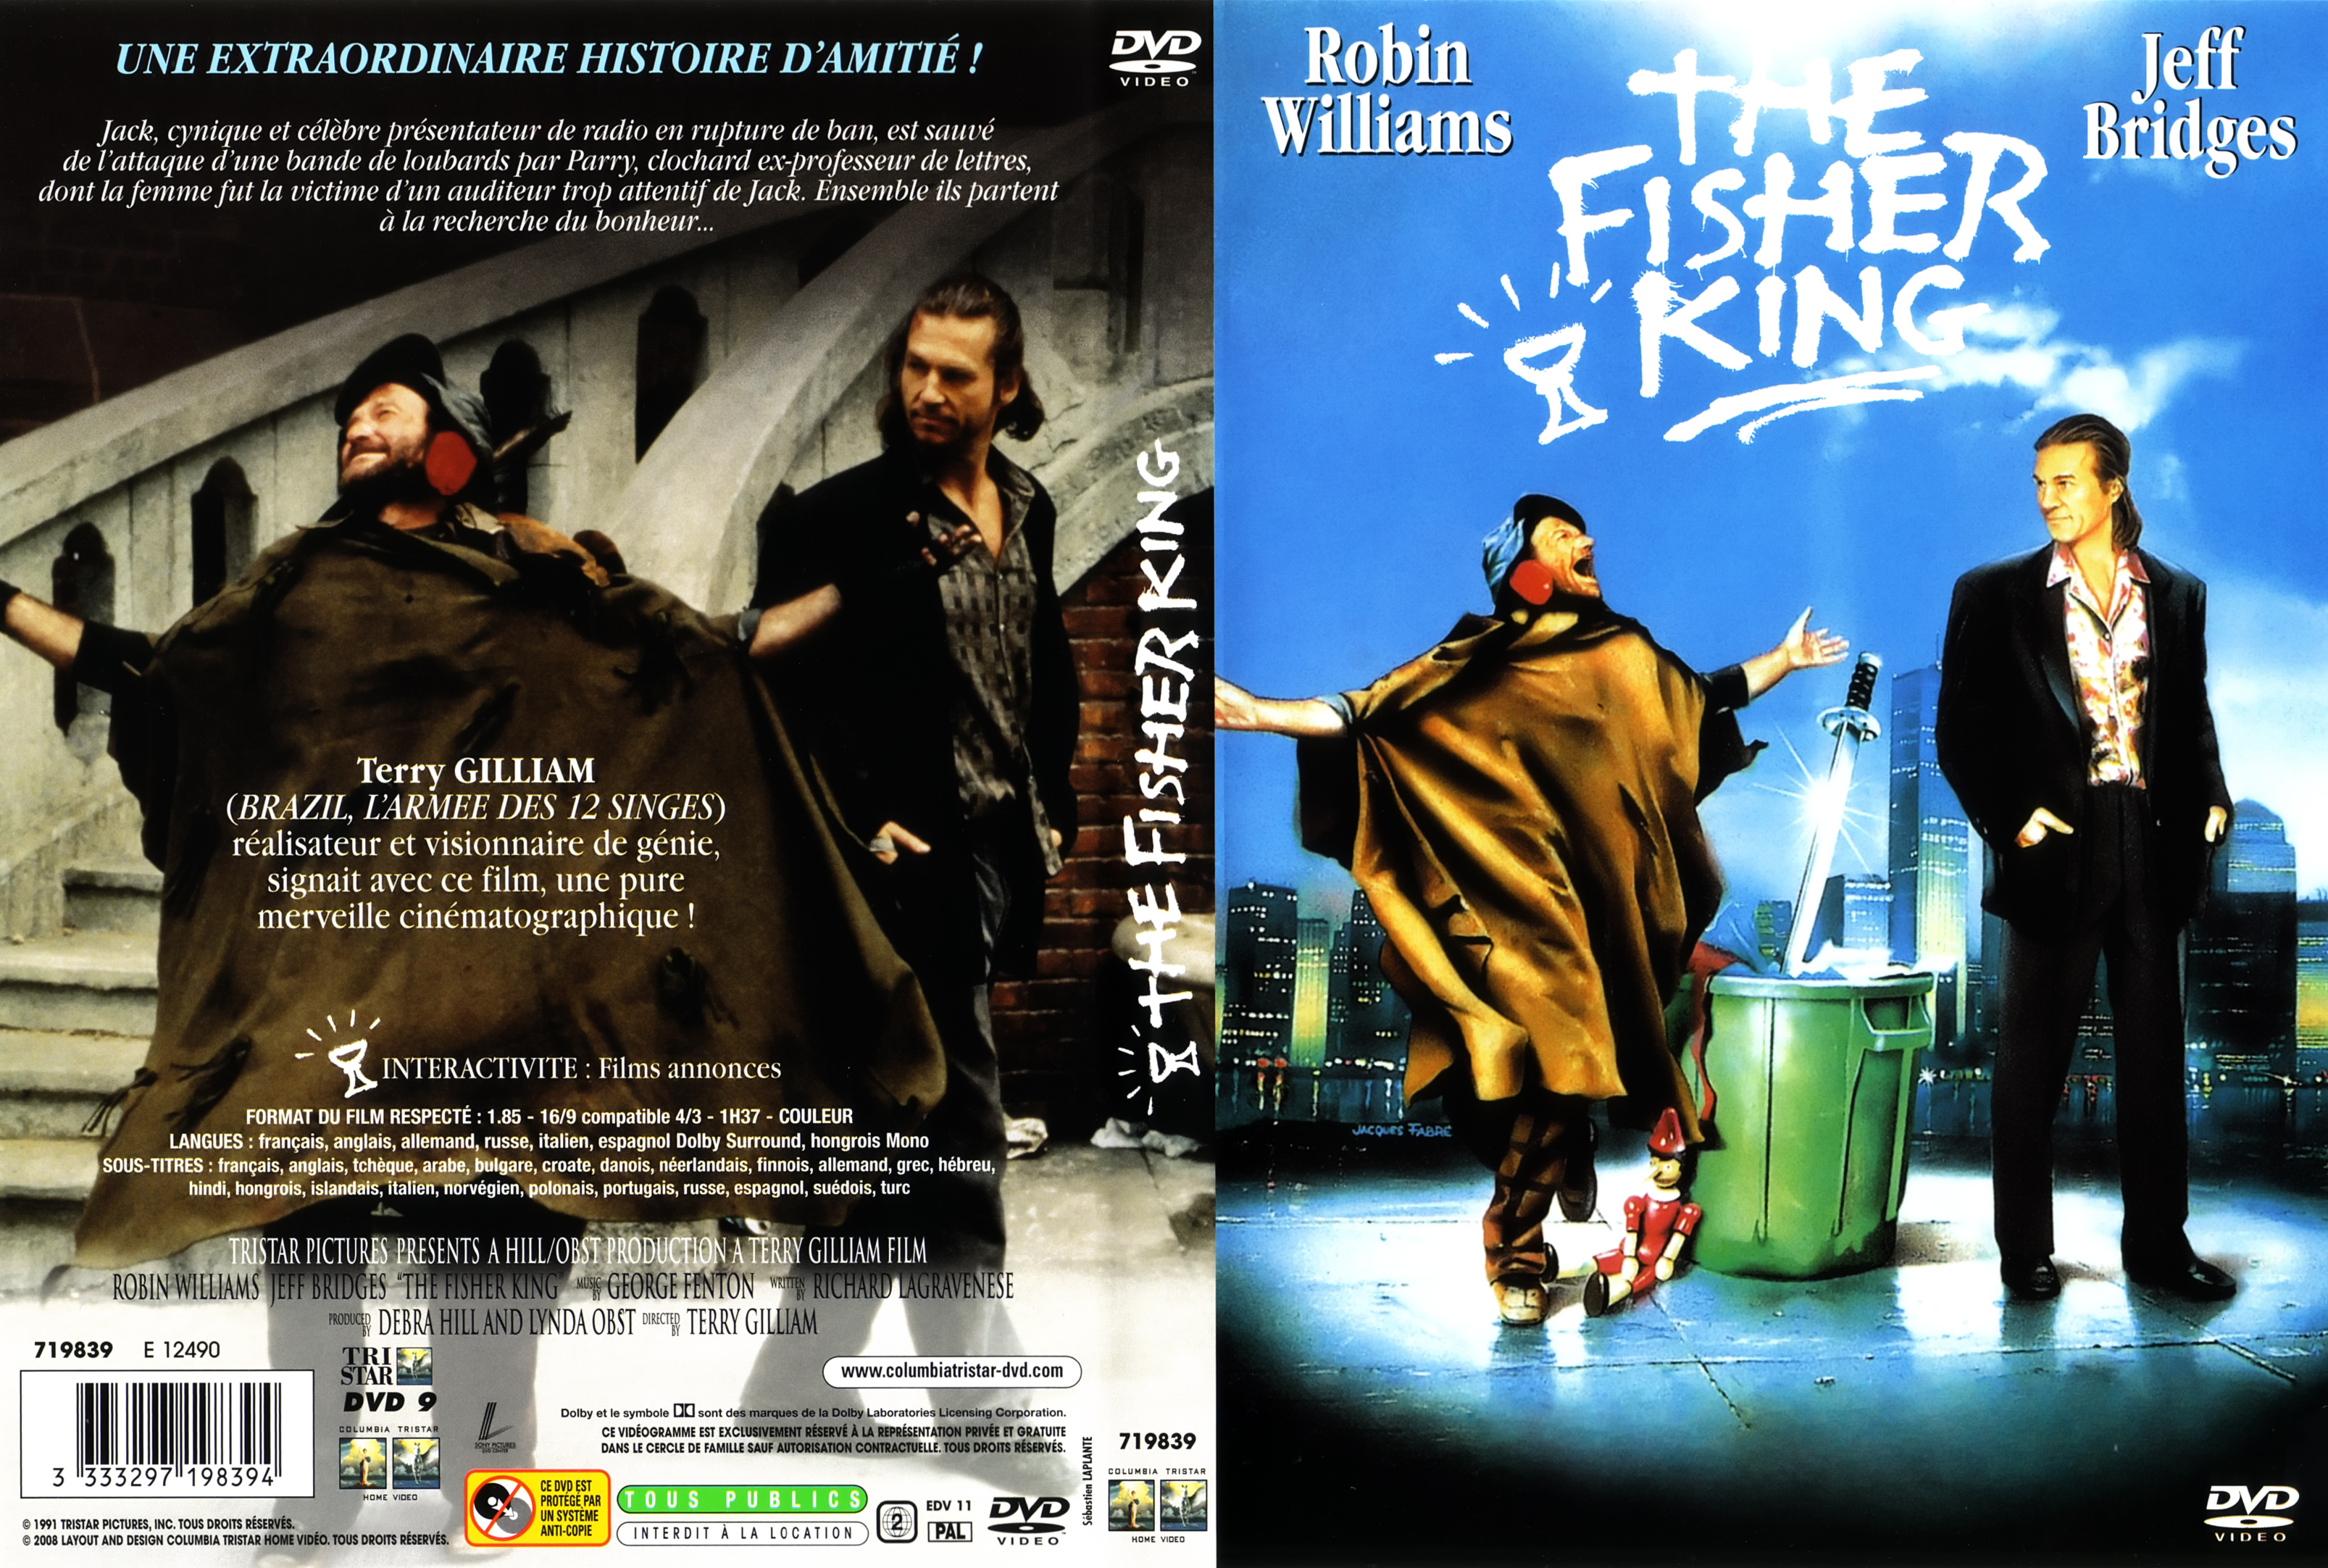 Jaquette DVD The fisher king v2